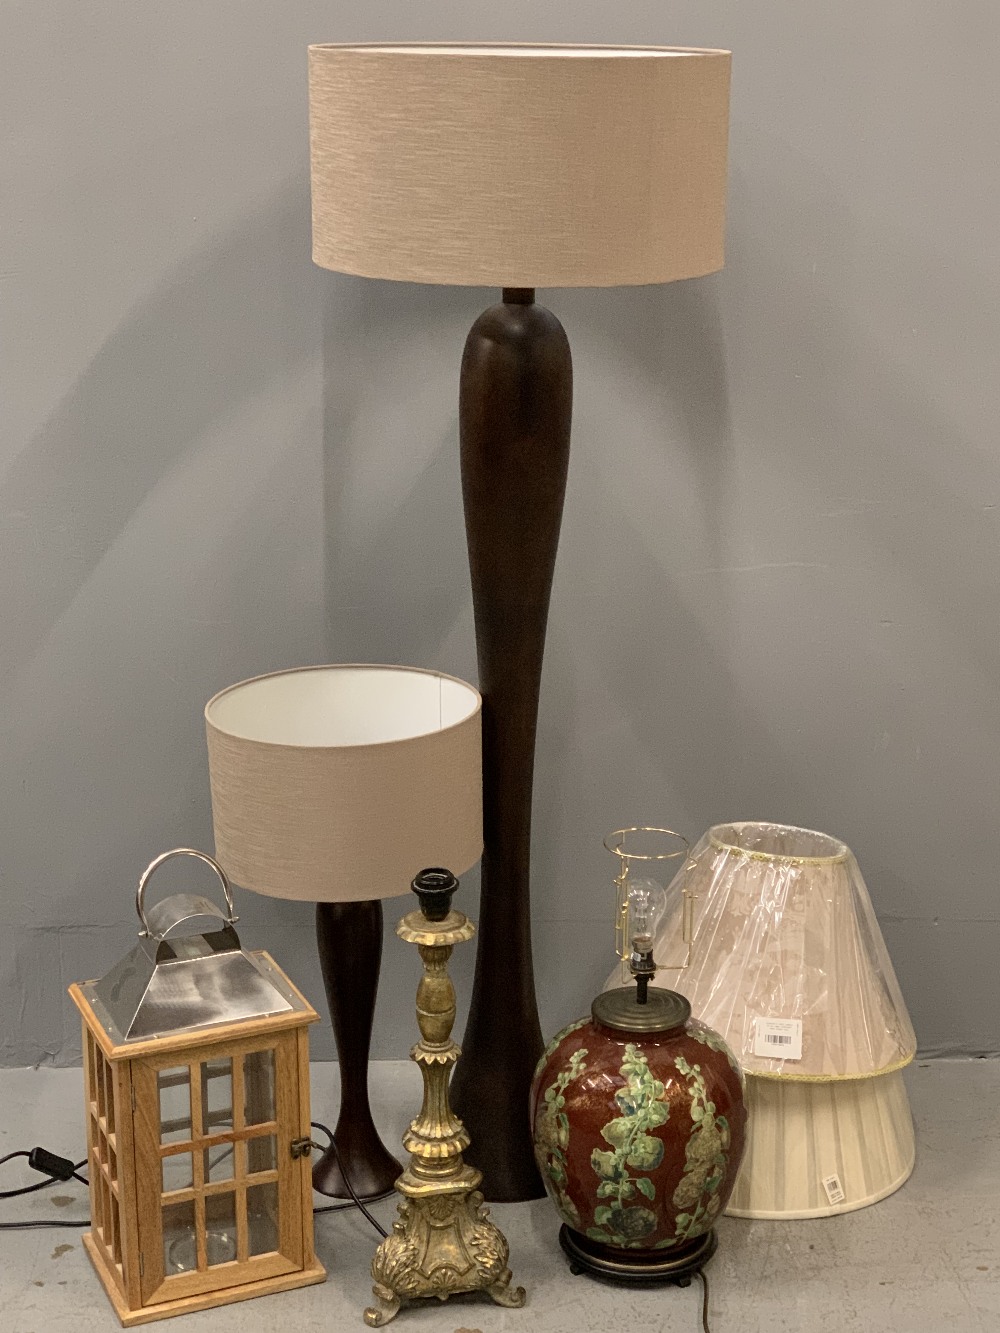 MODERN FURNISHING STANDARD LAMP with a matching table lamp, a reproduction Chinese glass table lamp, - Image 2 of 2